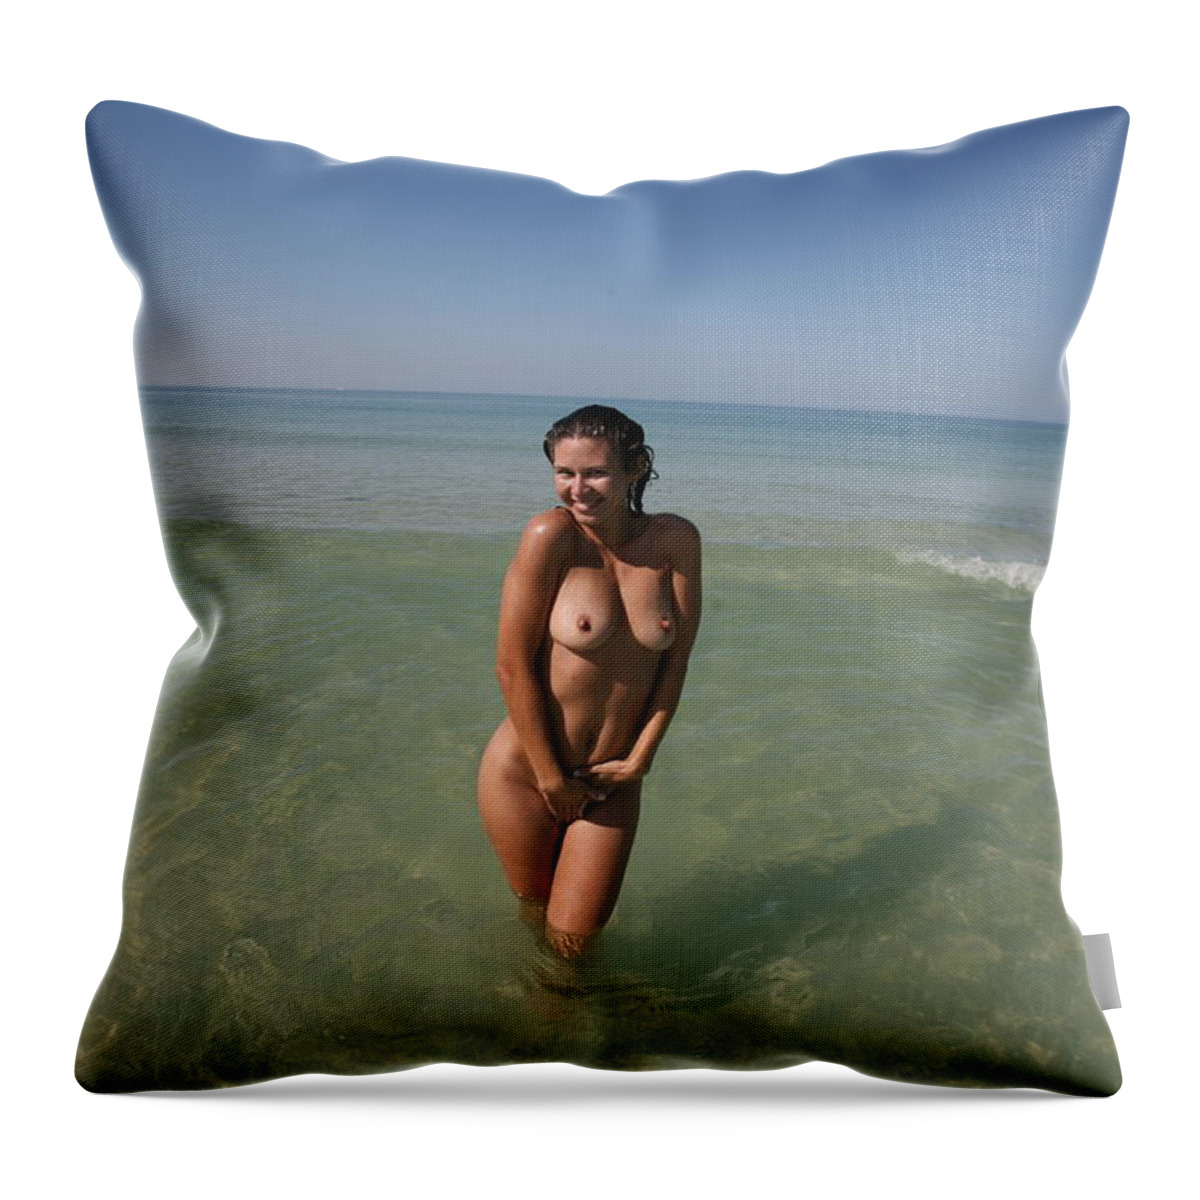 Everglades City Everglades City Glamour  Everglades City Photographer  Everglades City Glamorous Photographer Lucky Cole  Everglades City Lucky Cole Lucky Cole Everglades City Beauty  Everglades City Beauty Photographer Sexy Exotic Female Beauty Glamorous Natural Throw Pillow featuring the photograph Everglades City Photography by Lucky Cole 975 by Lucky Cole